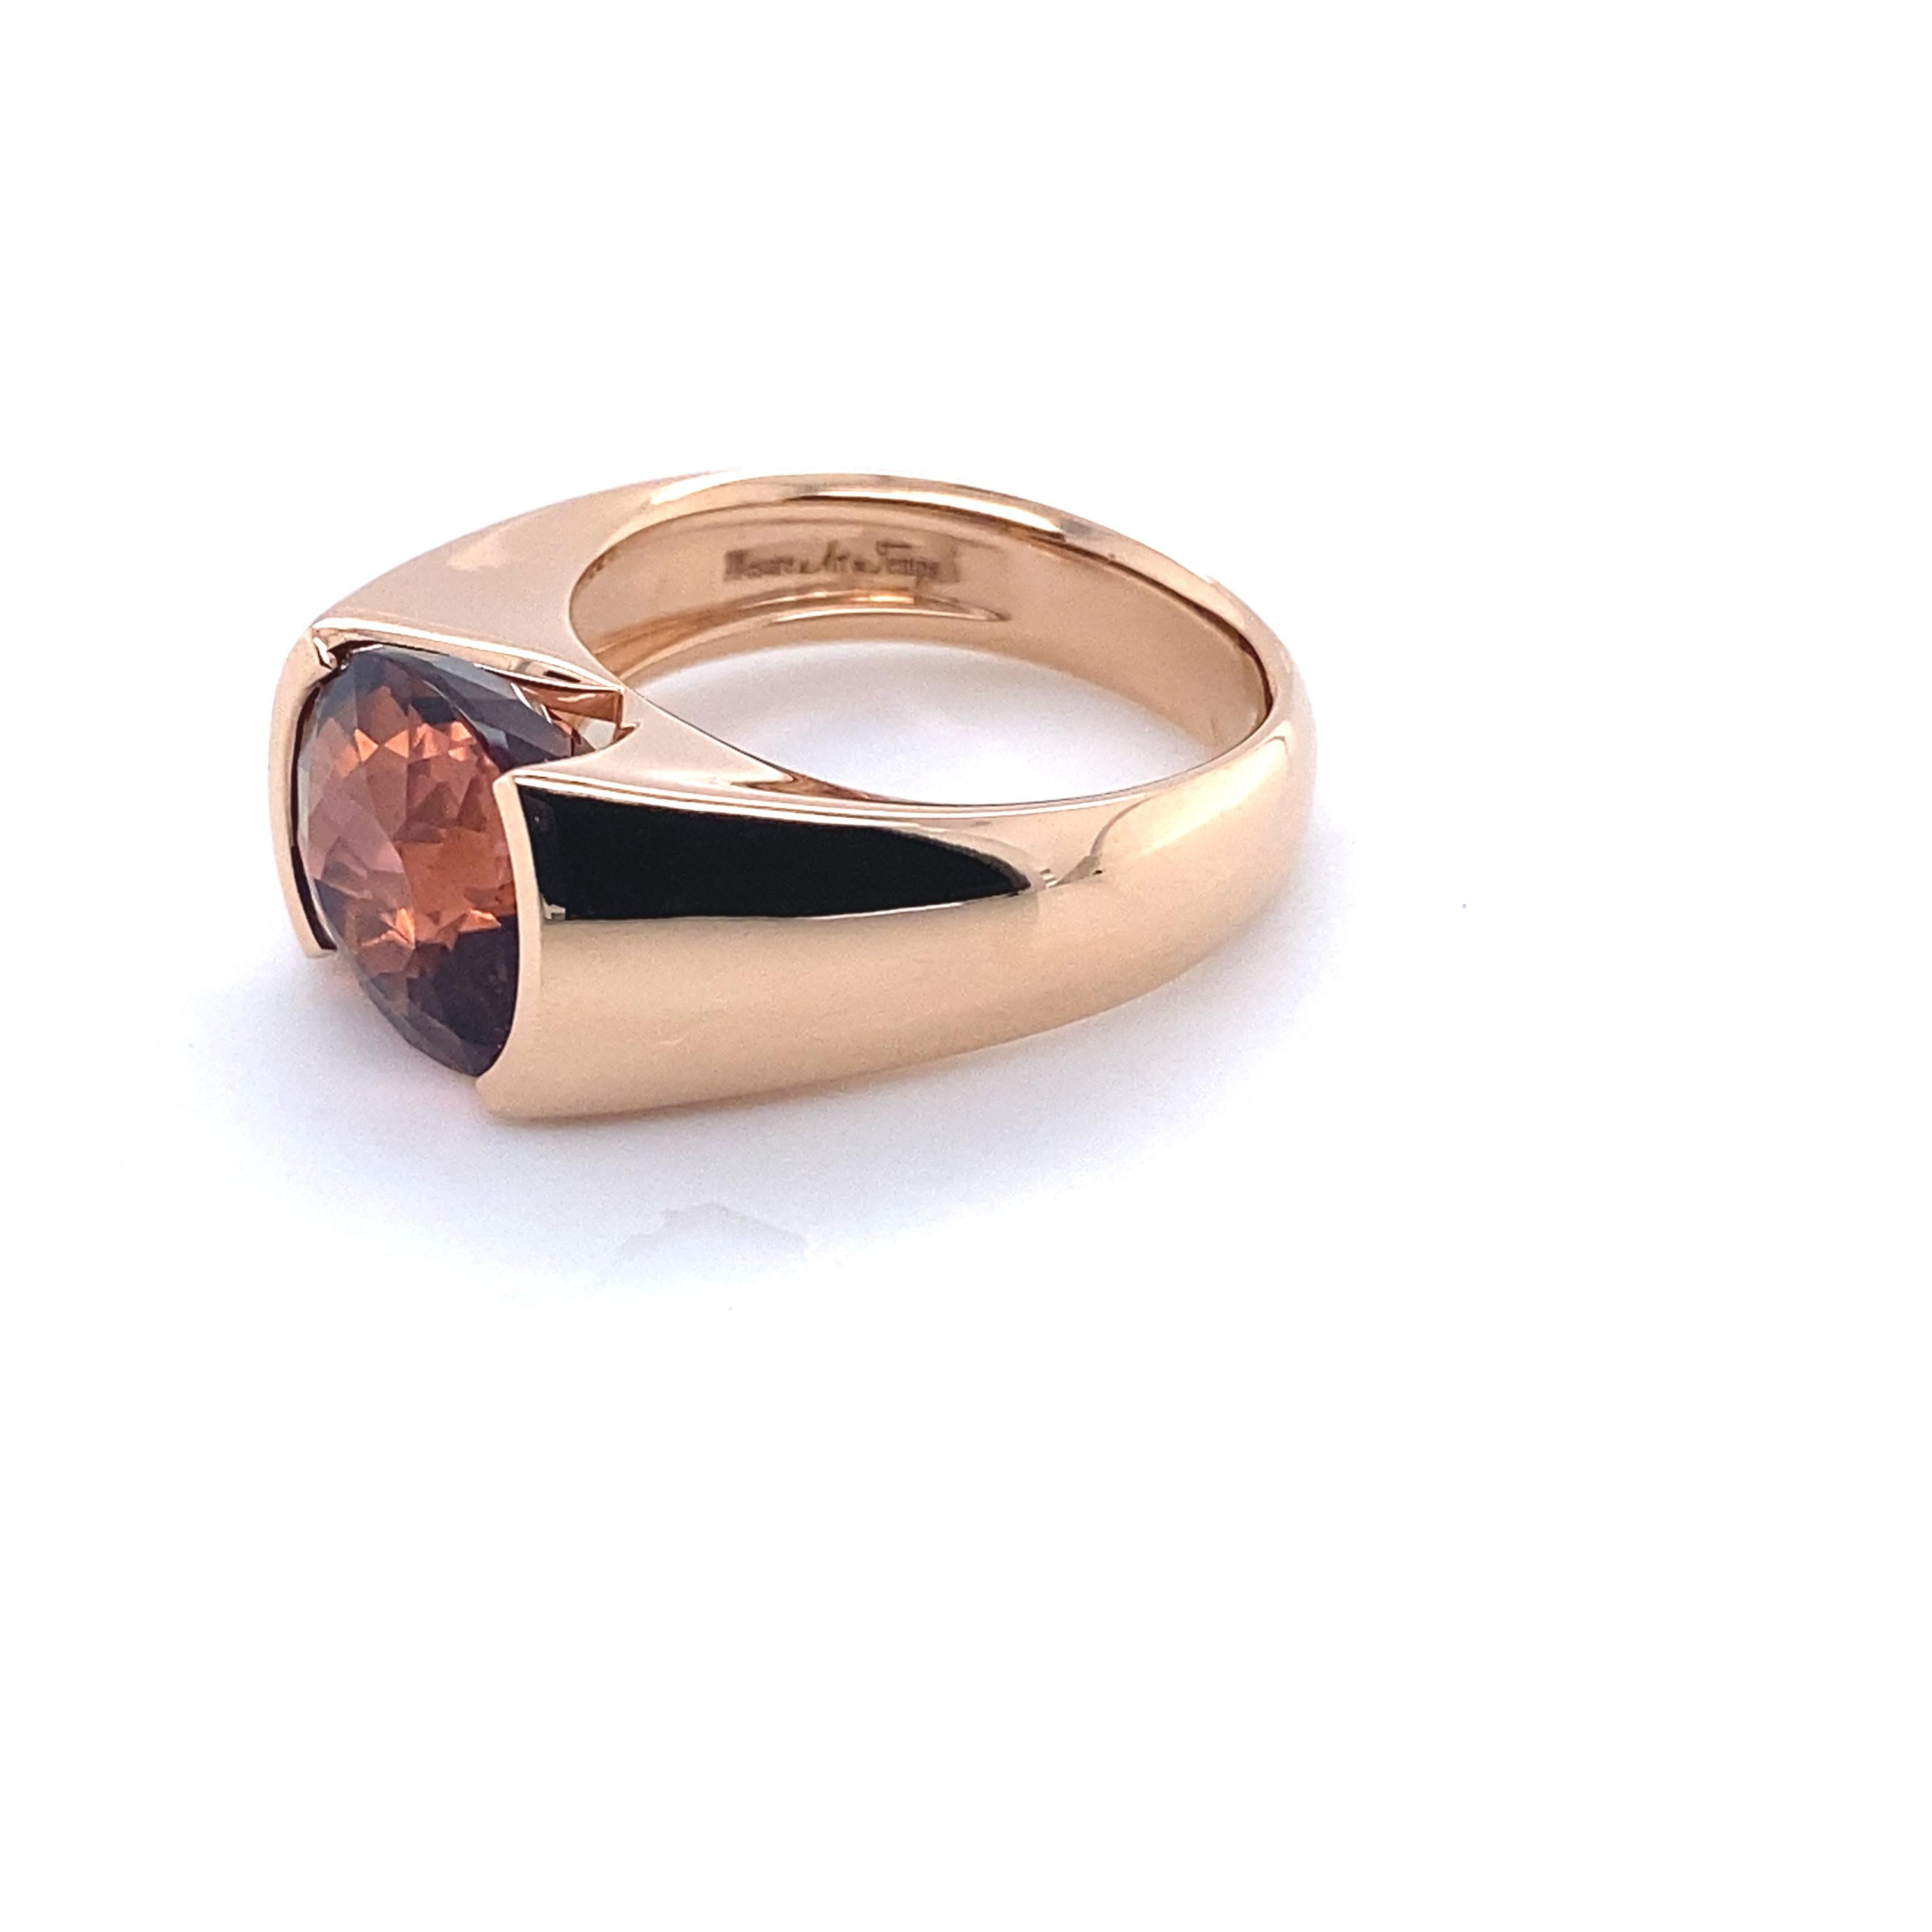 French Rose Gold 18 Carats Cocktail Ring Topped with a Tourmaline
French Collection by Mesure et Art du Temps.

18 Karats ring.
The weight of gold is 10.5 grams of Carats.
The weight of the ring is 10.7 grams.
The Tourmaline is 1.1 cm is lenght, 1cm